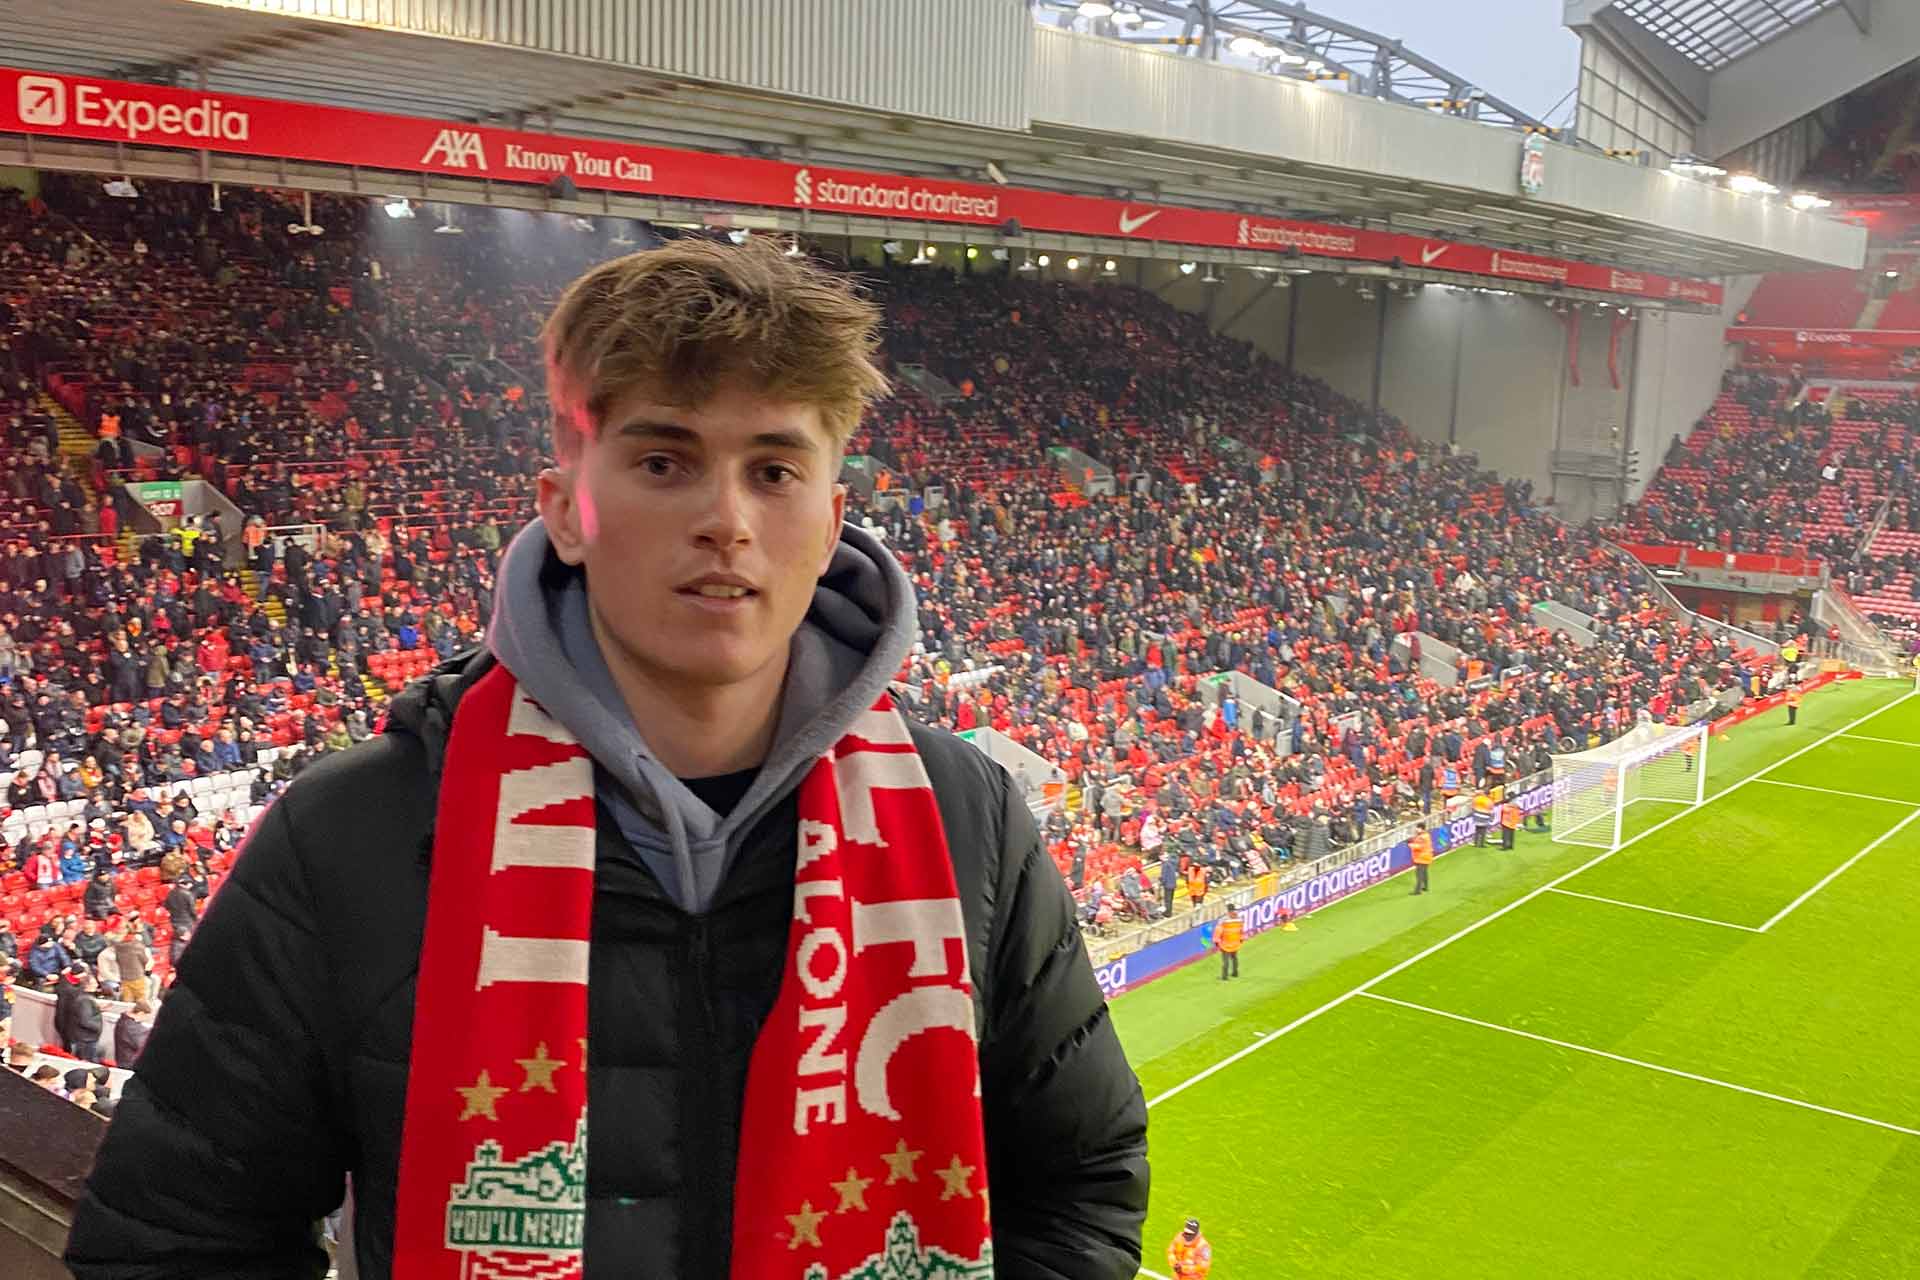 Student Will stands in Anfield stadium, with a full Kop stand visible behind him.